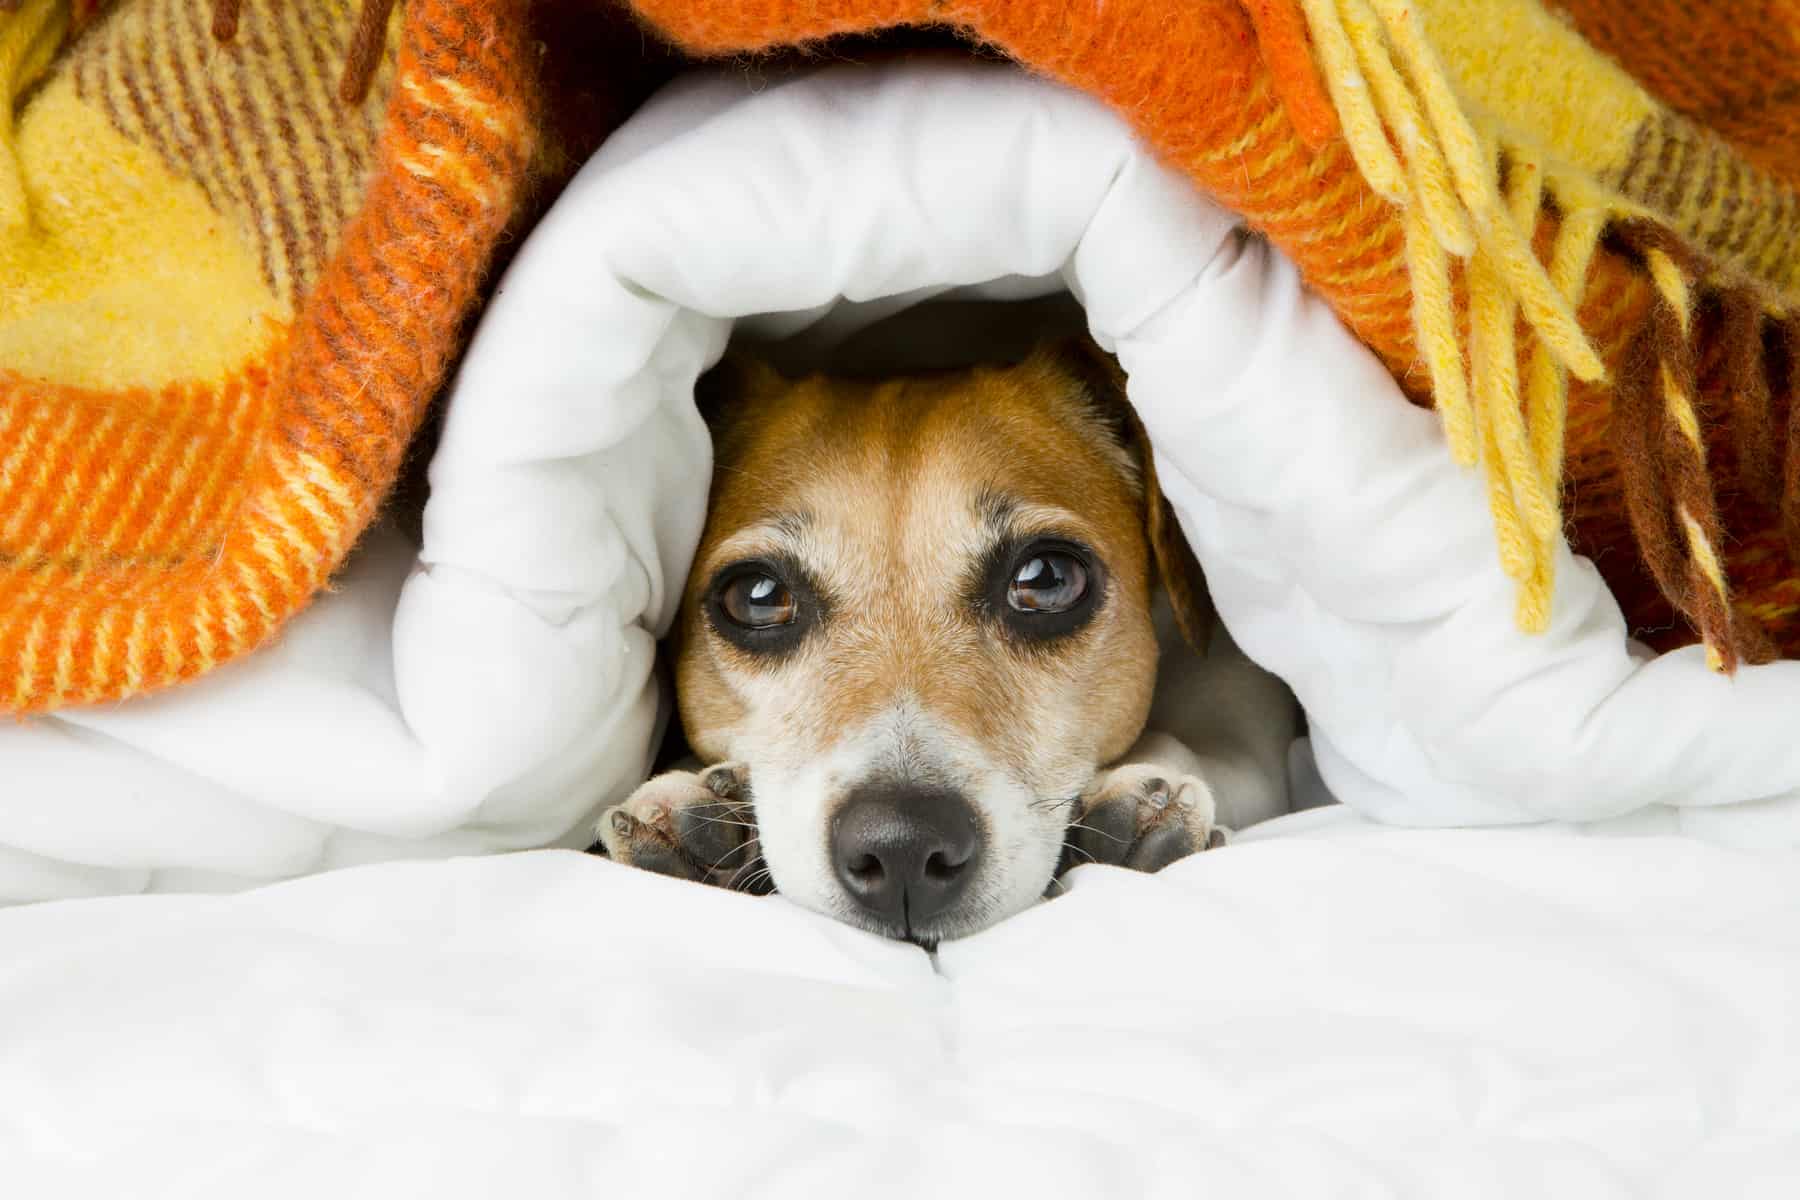 Dog keeping warm under blankets while on a heated dog bed